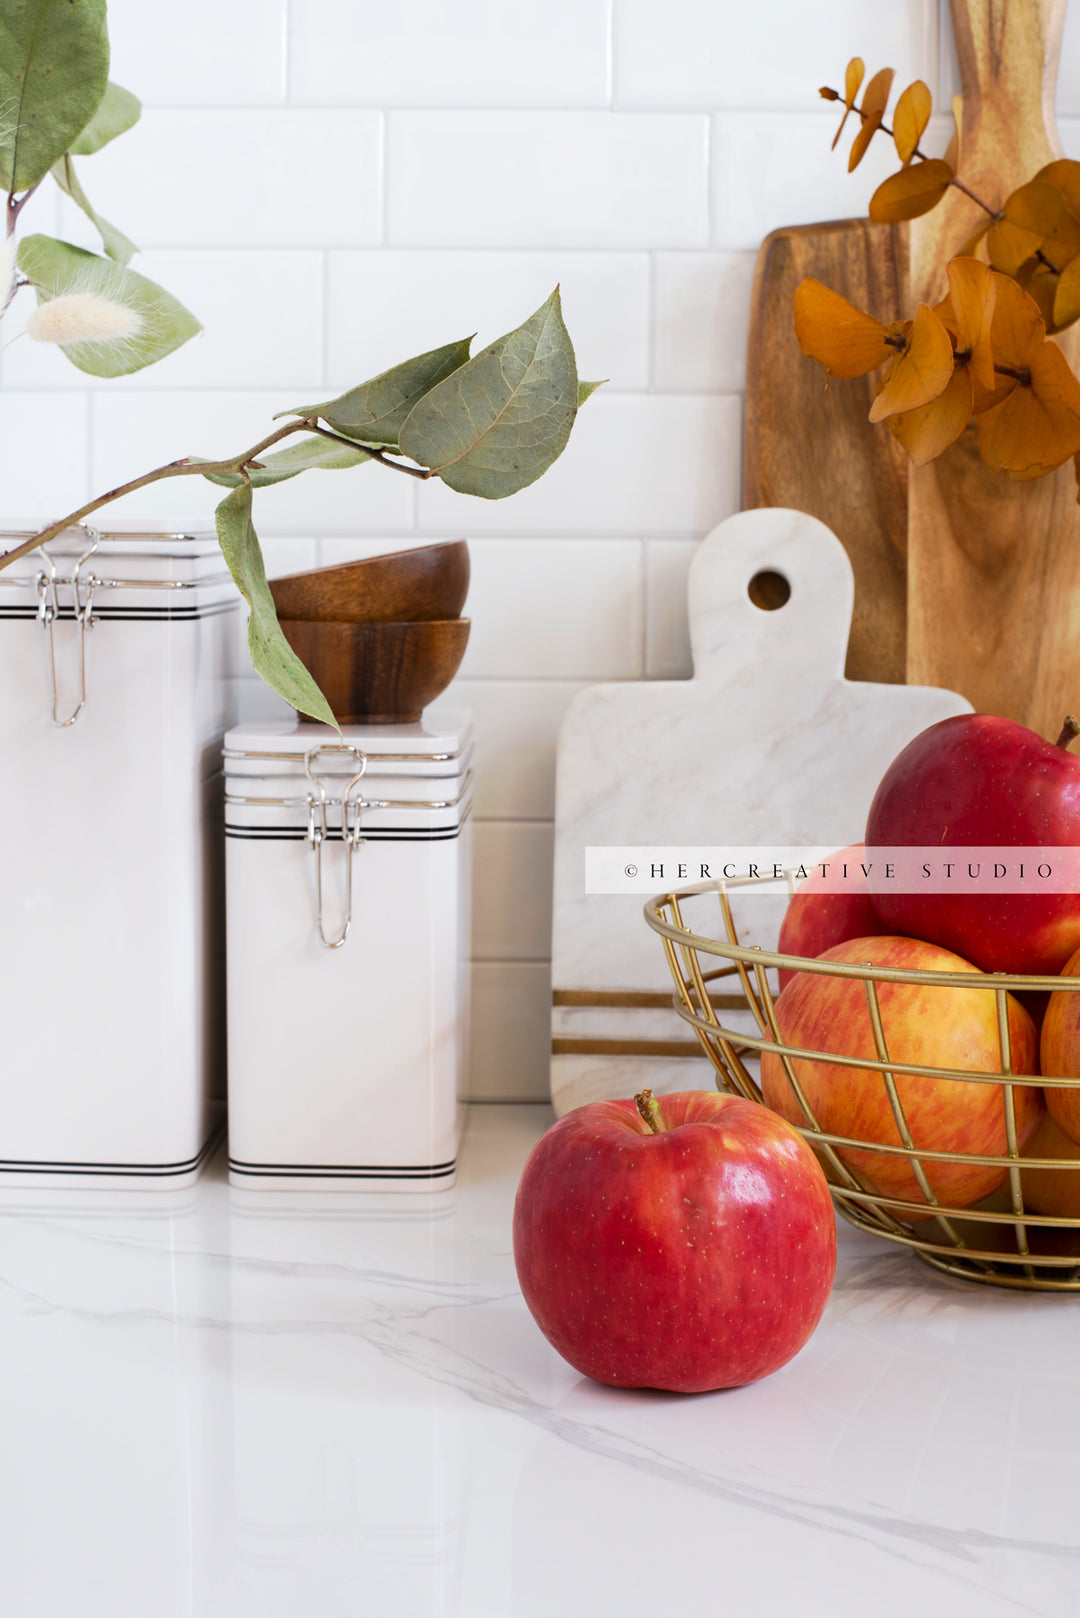 Apples in Fall Kitchen. Digital Stock Image.